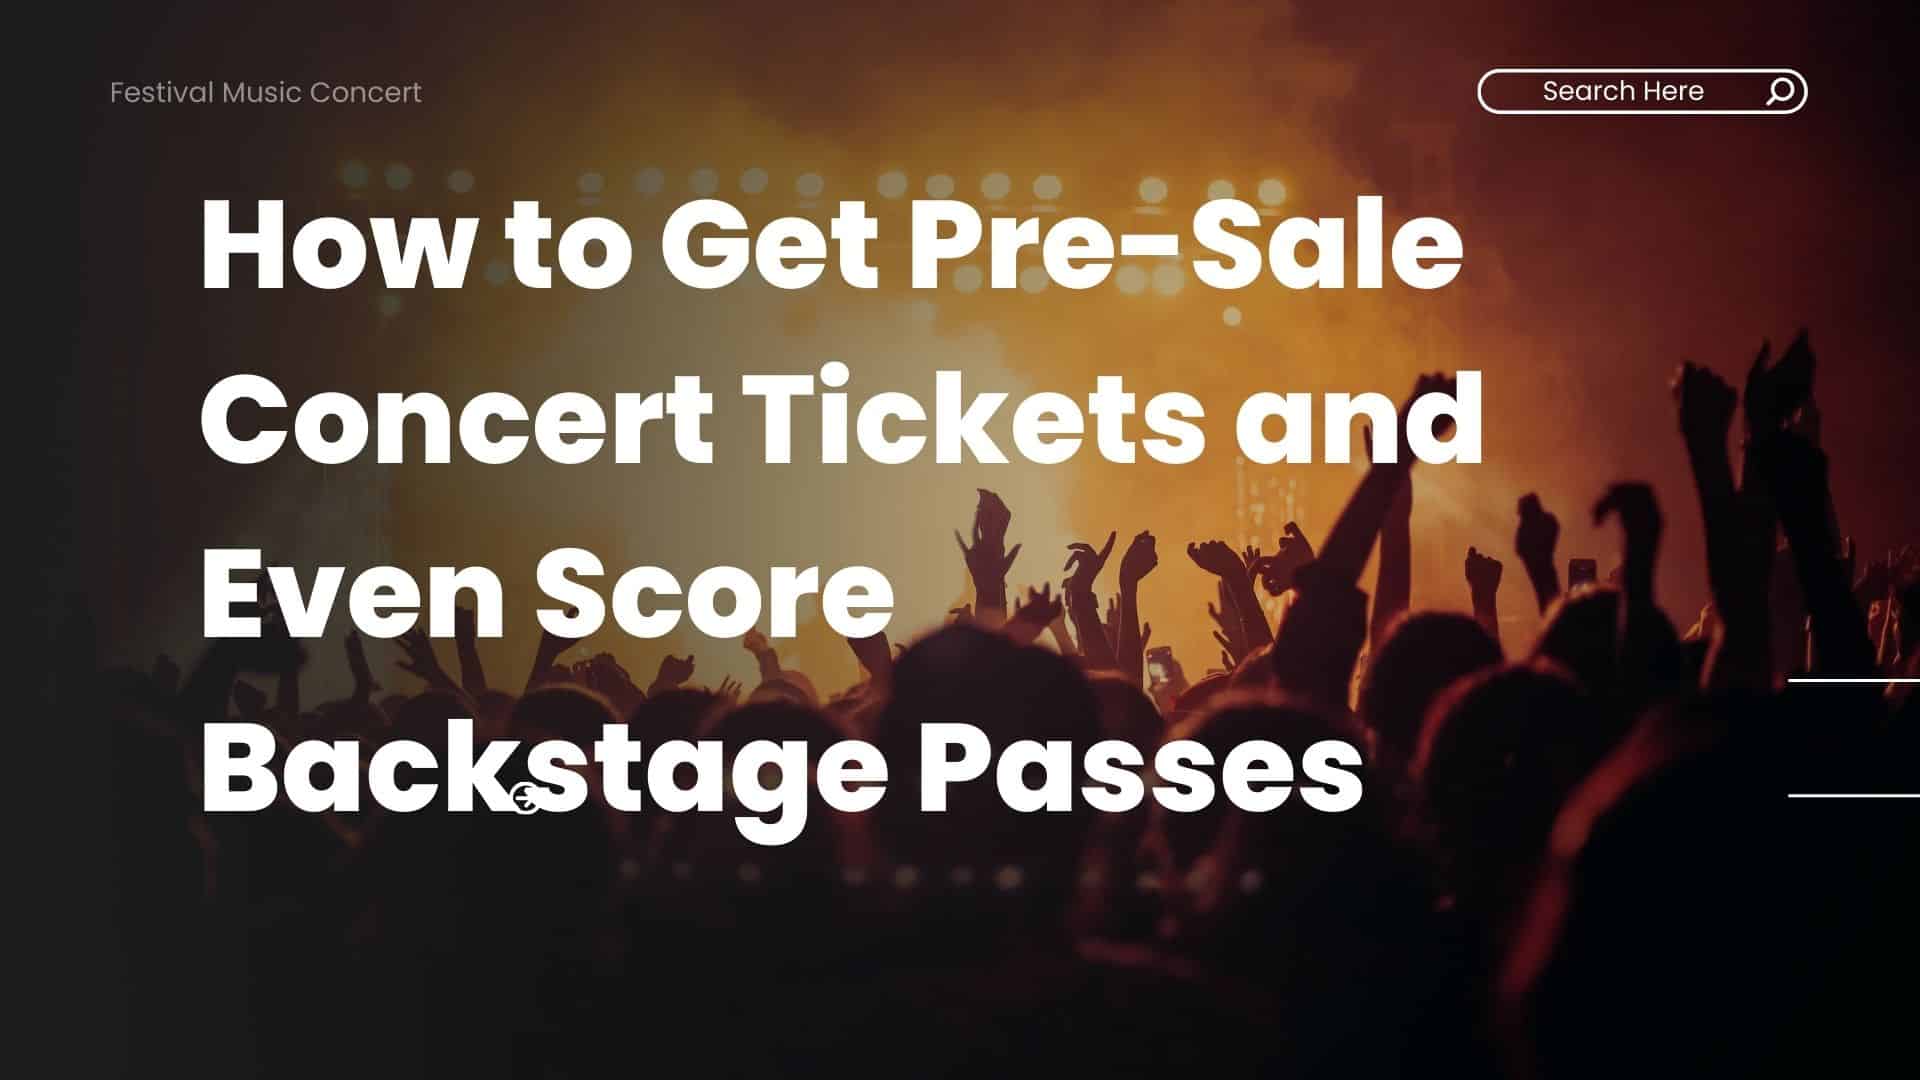 How to Get Pre-Sale Concert Tickets and Even Score Backstage Passes